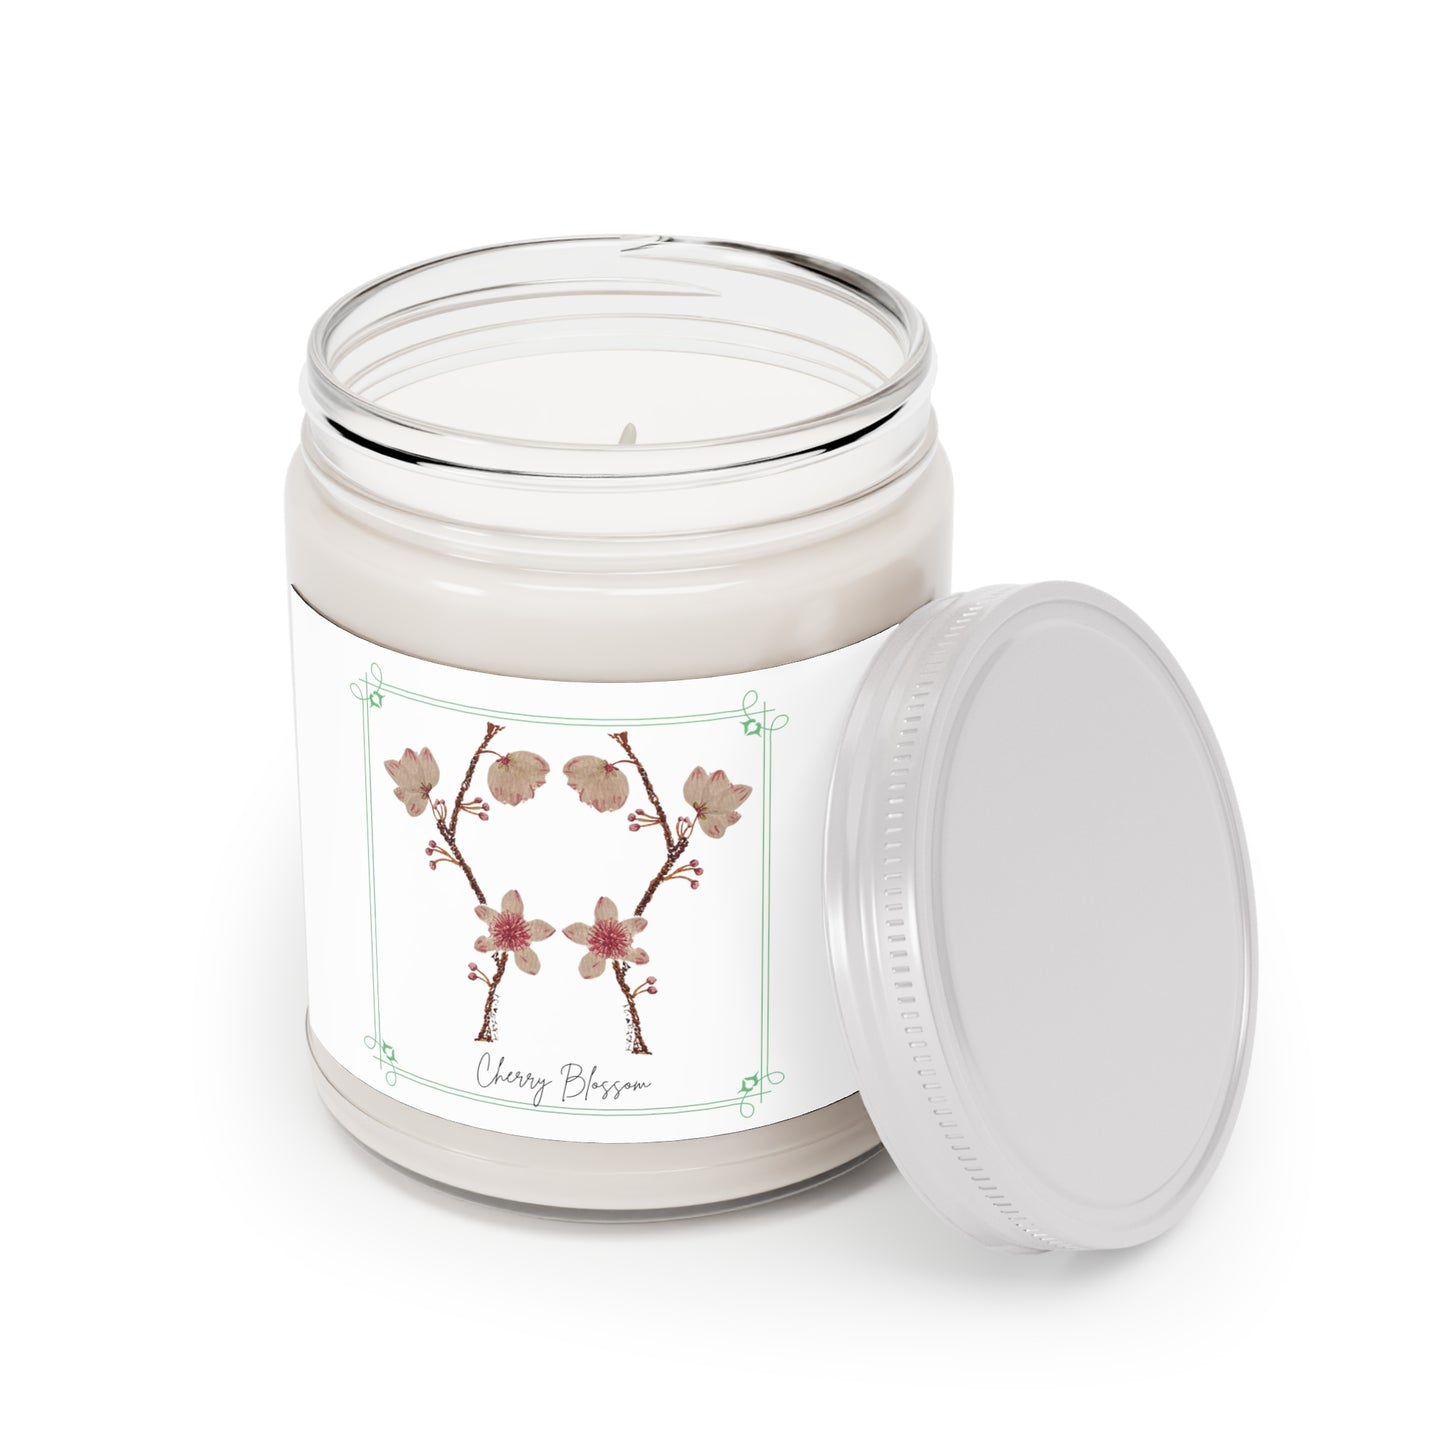 Cherry Blossom Handpainted Scented Candles, 9oz